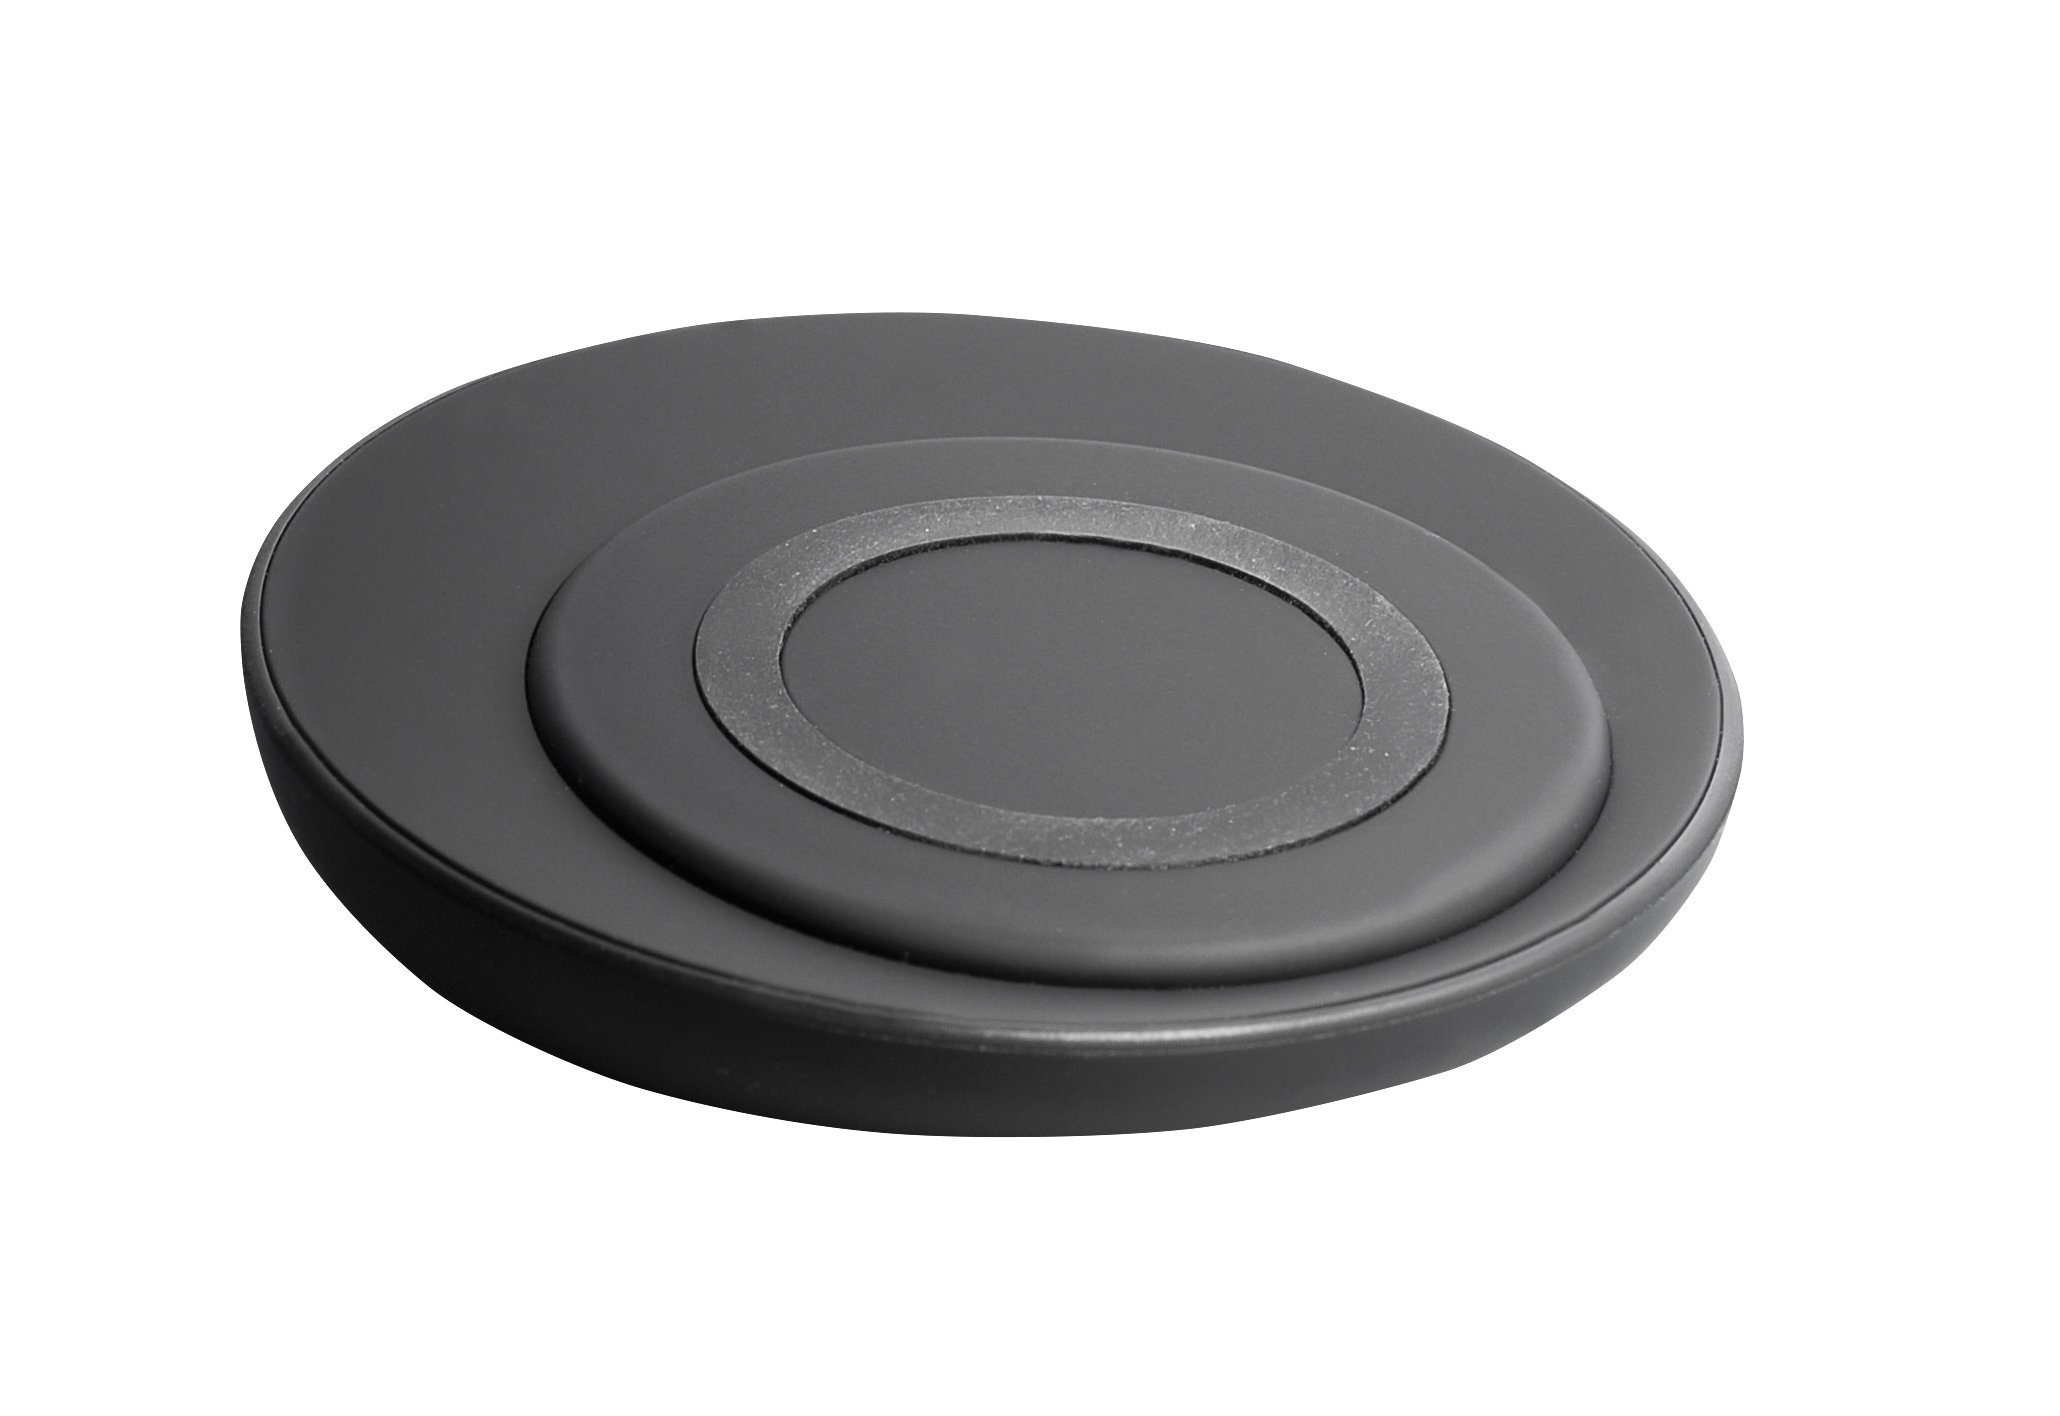 Maxtrack Handy-Netzteile (wireless Qi Charger, kabellose Ladestation)